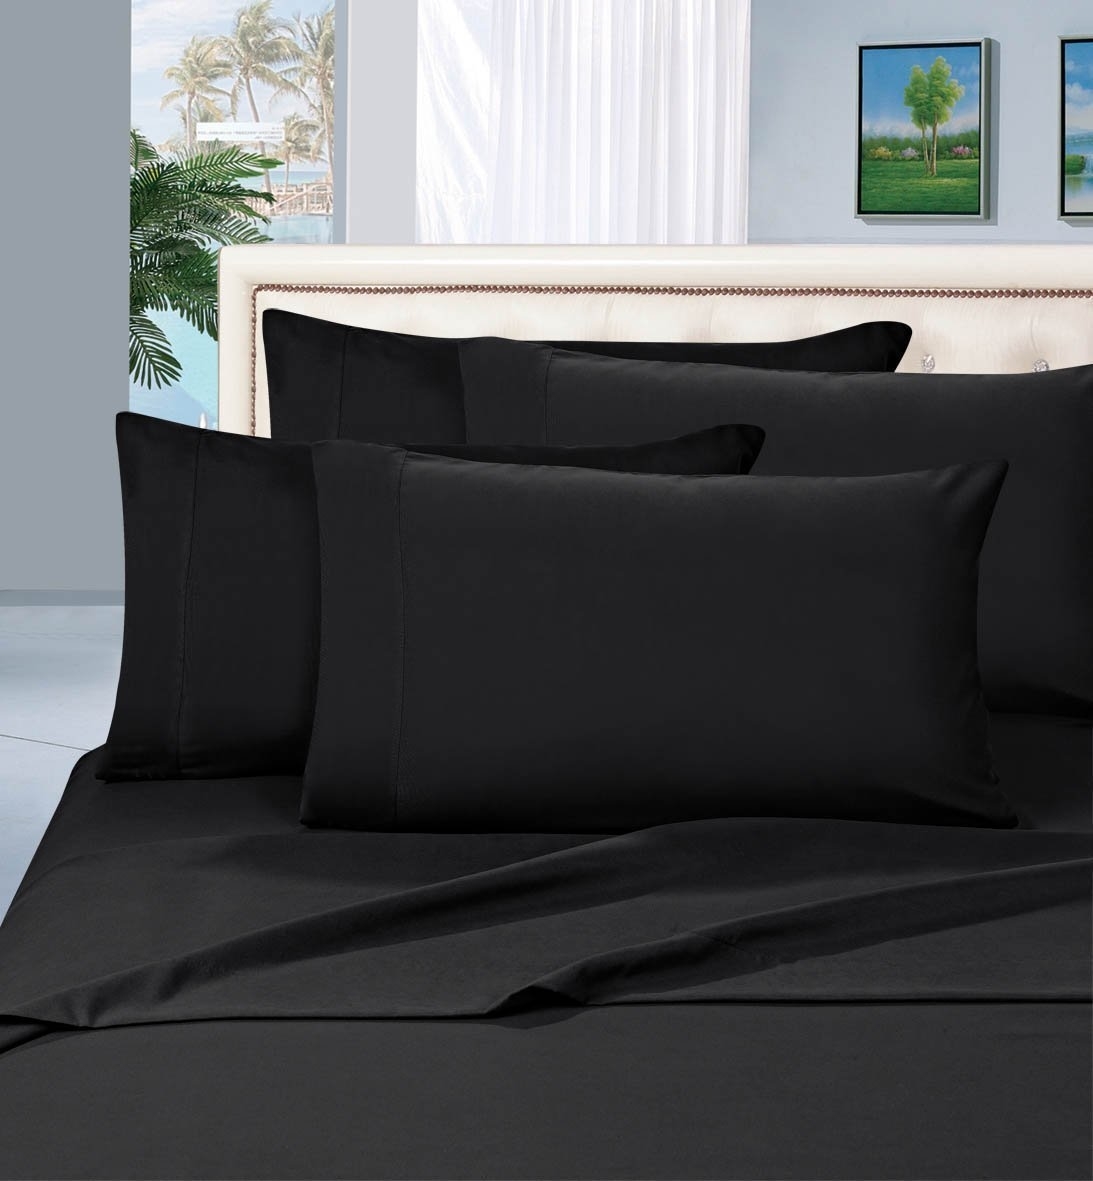 Elegant Comfort 1500 Series Wrinkle Resistant Egyptian Quality Hypoallergenic Ultra Soft Luxury 4-piece Bed Sheet Set, Queen, Black